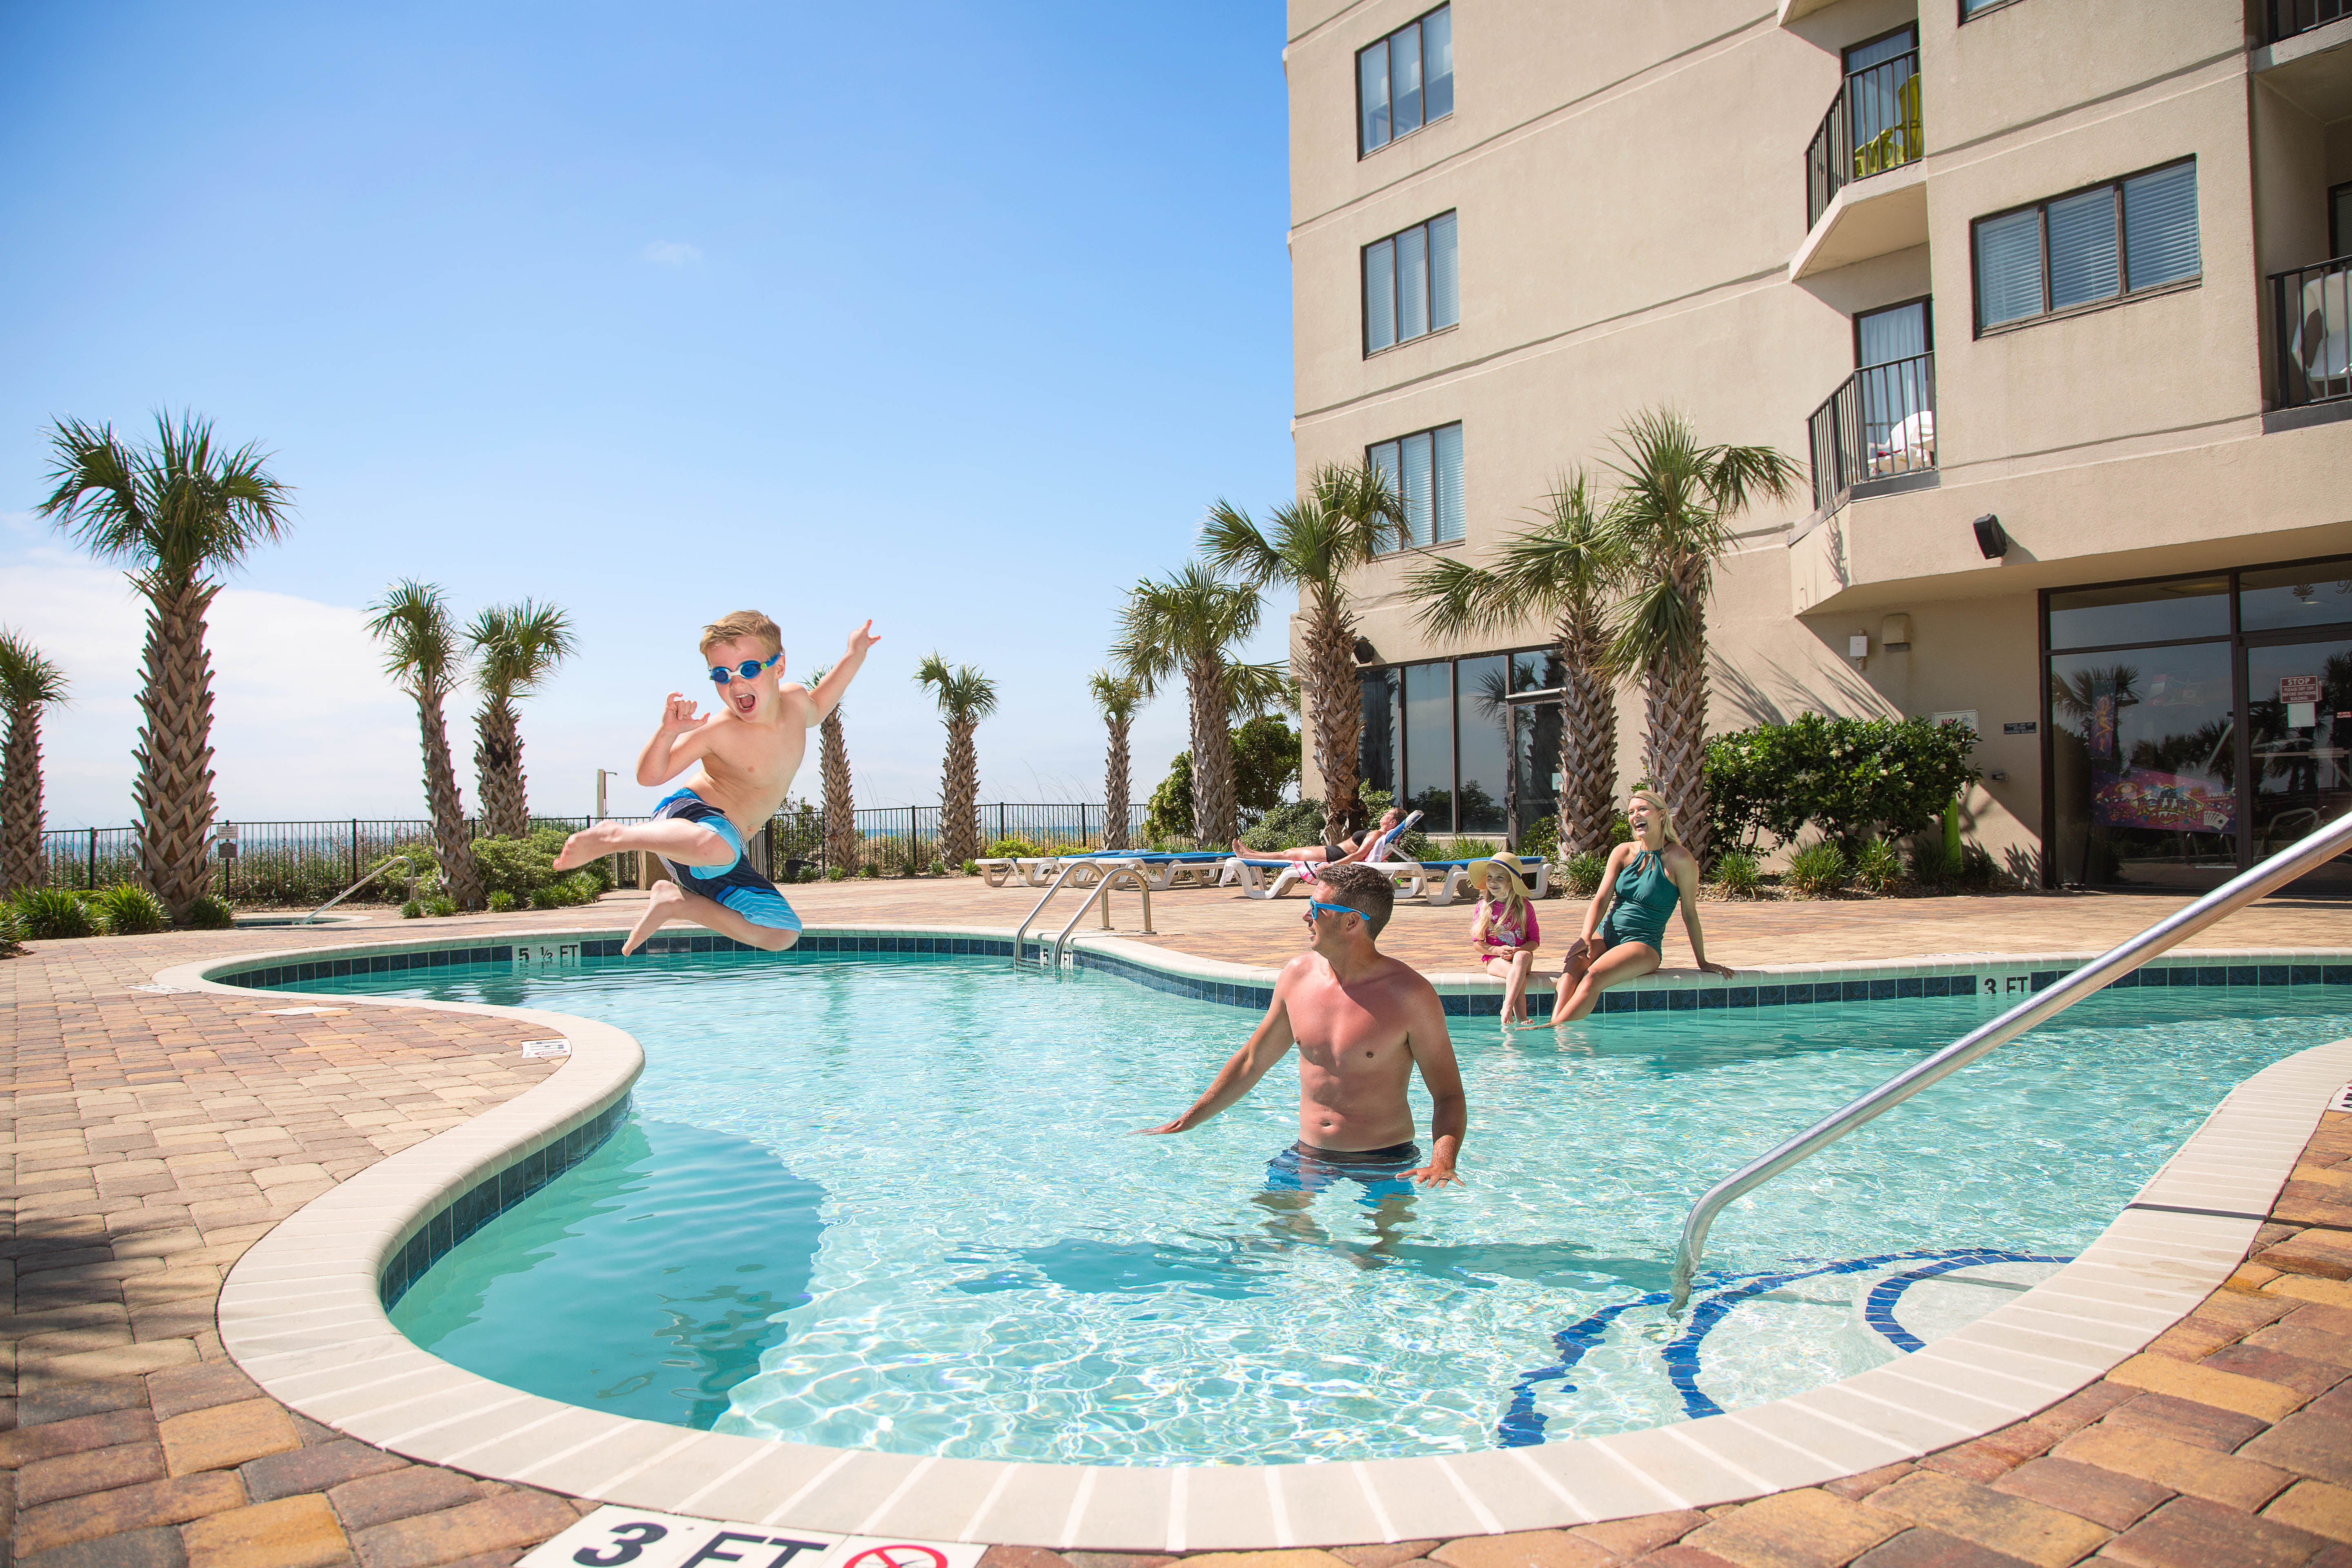 Hotels On Myrtle Beach For Cheap - eberwinedesign